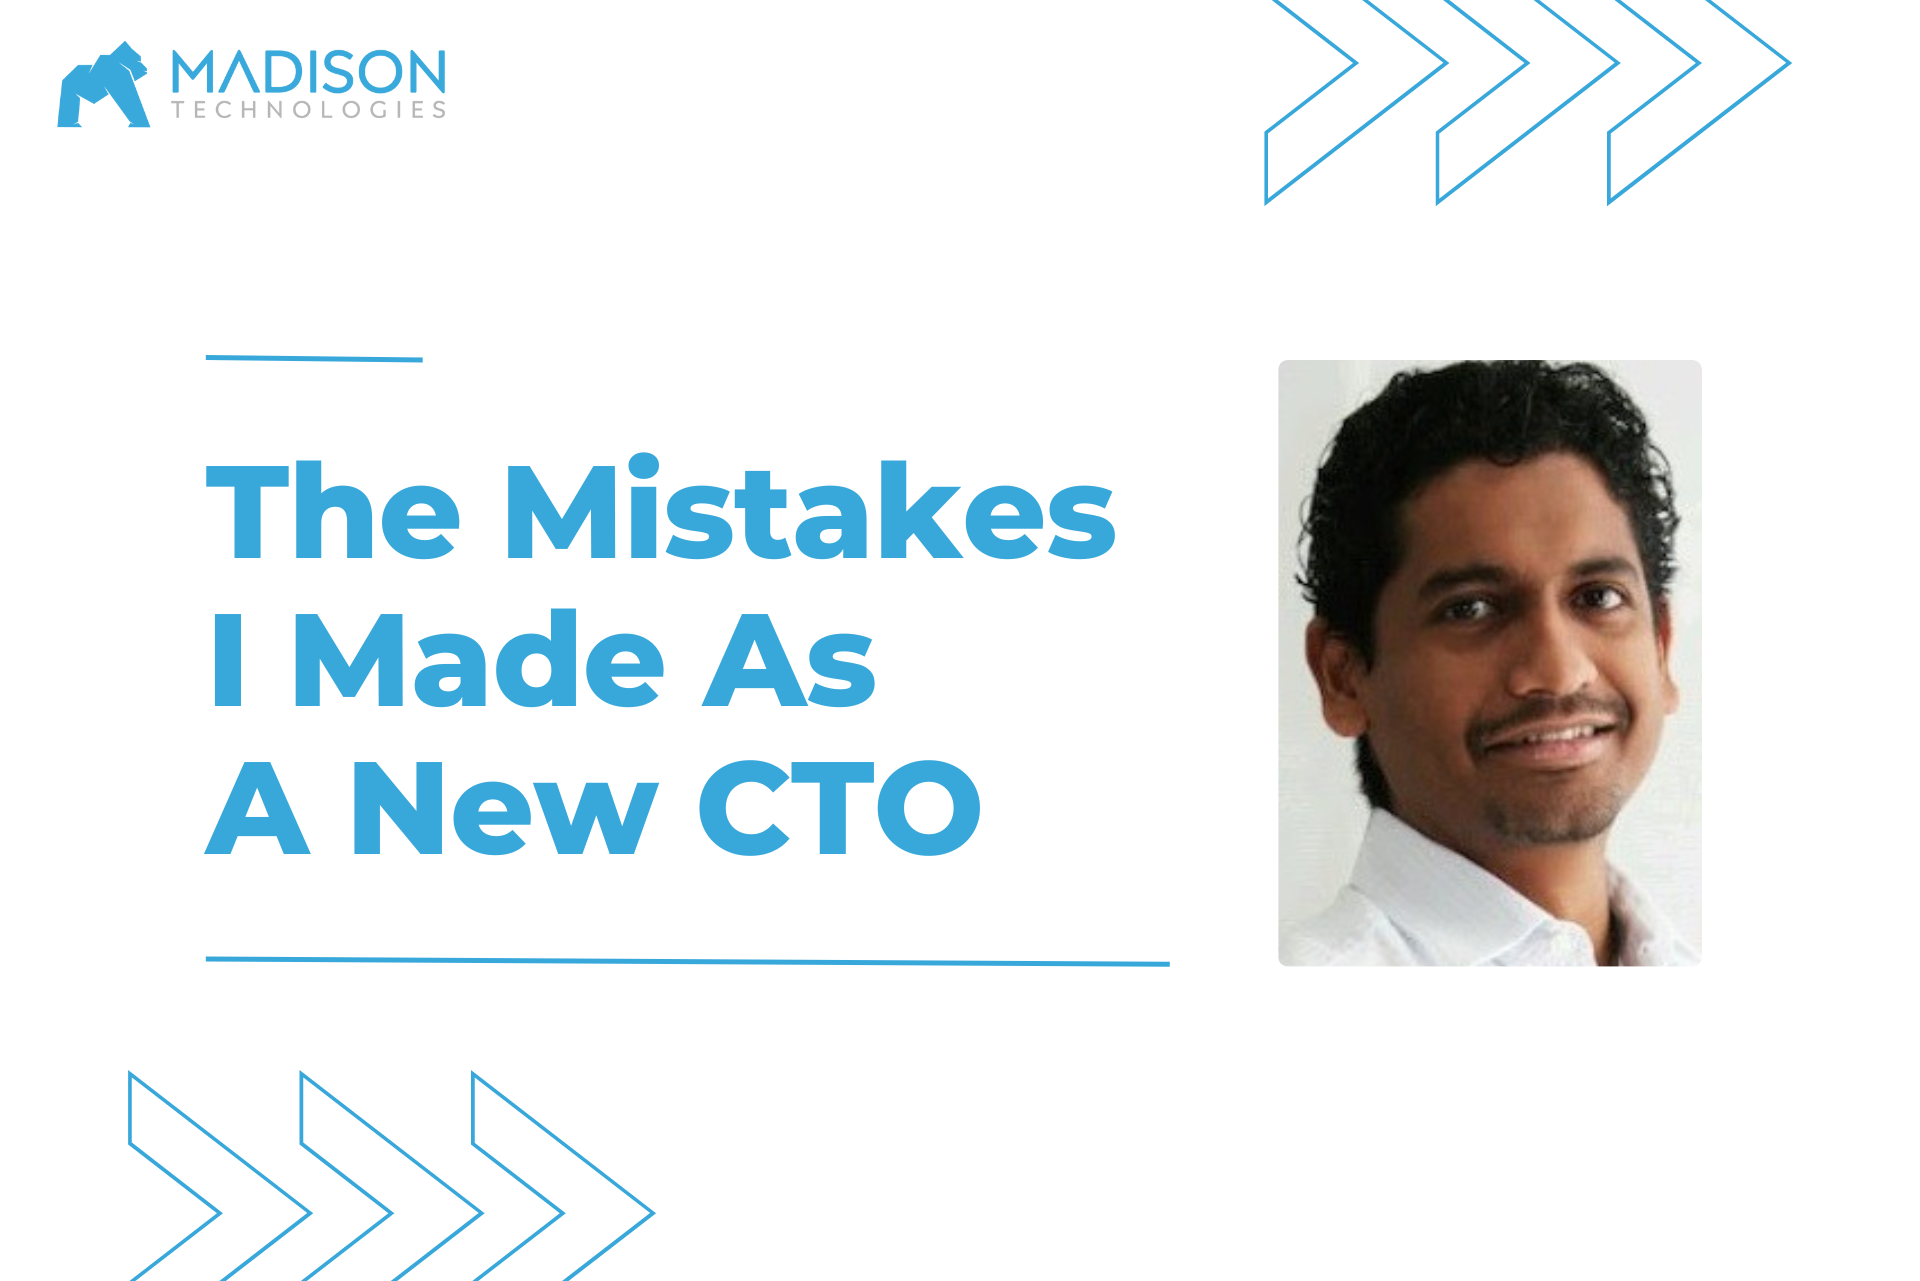 The Mistakes I Made as a New CTO